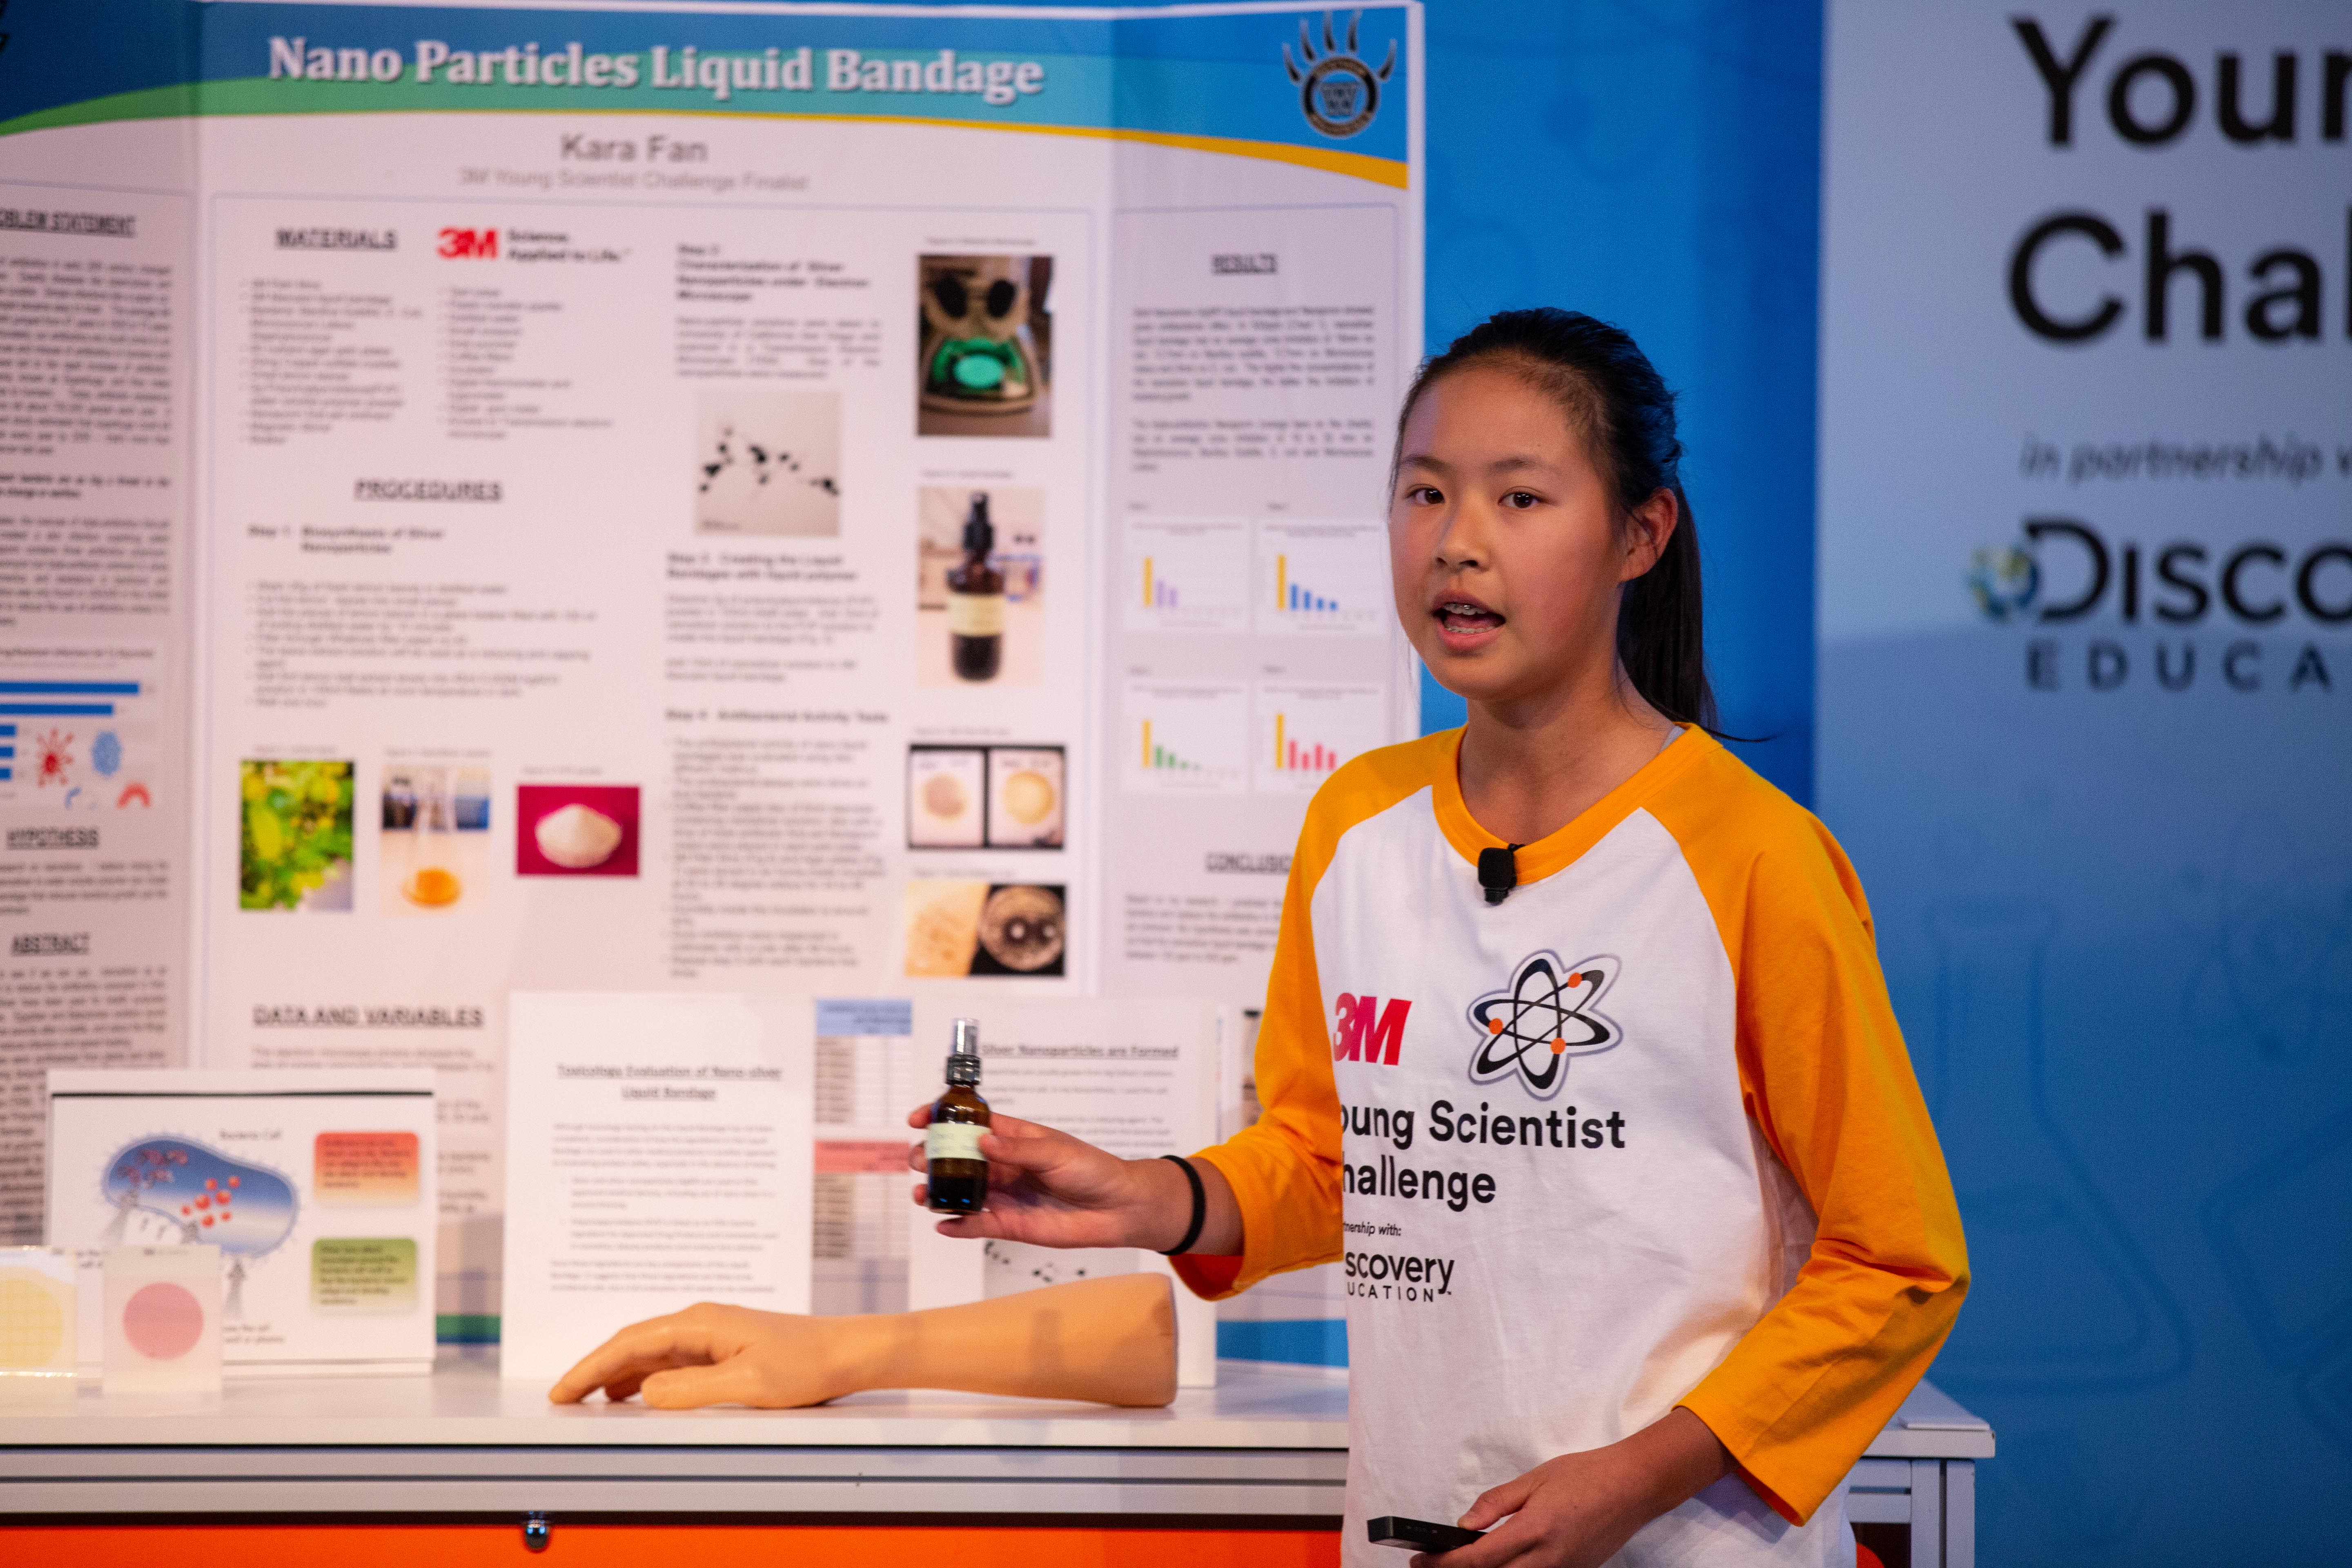 Kara Fan explains her first aid liquid bandage project. (Photos courtesy of 3M and Discovery Education)